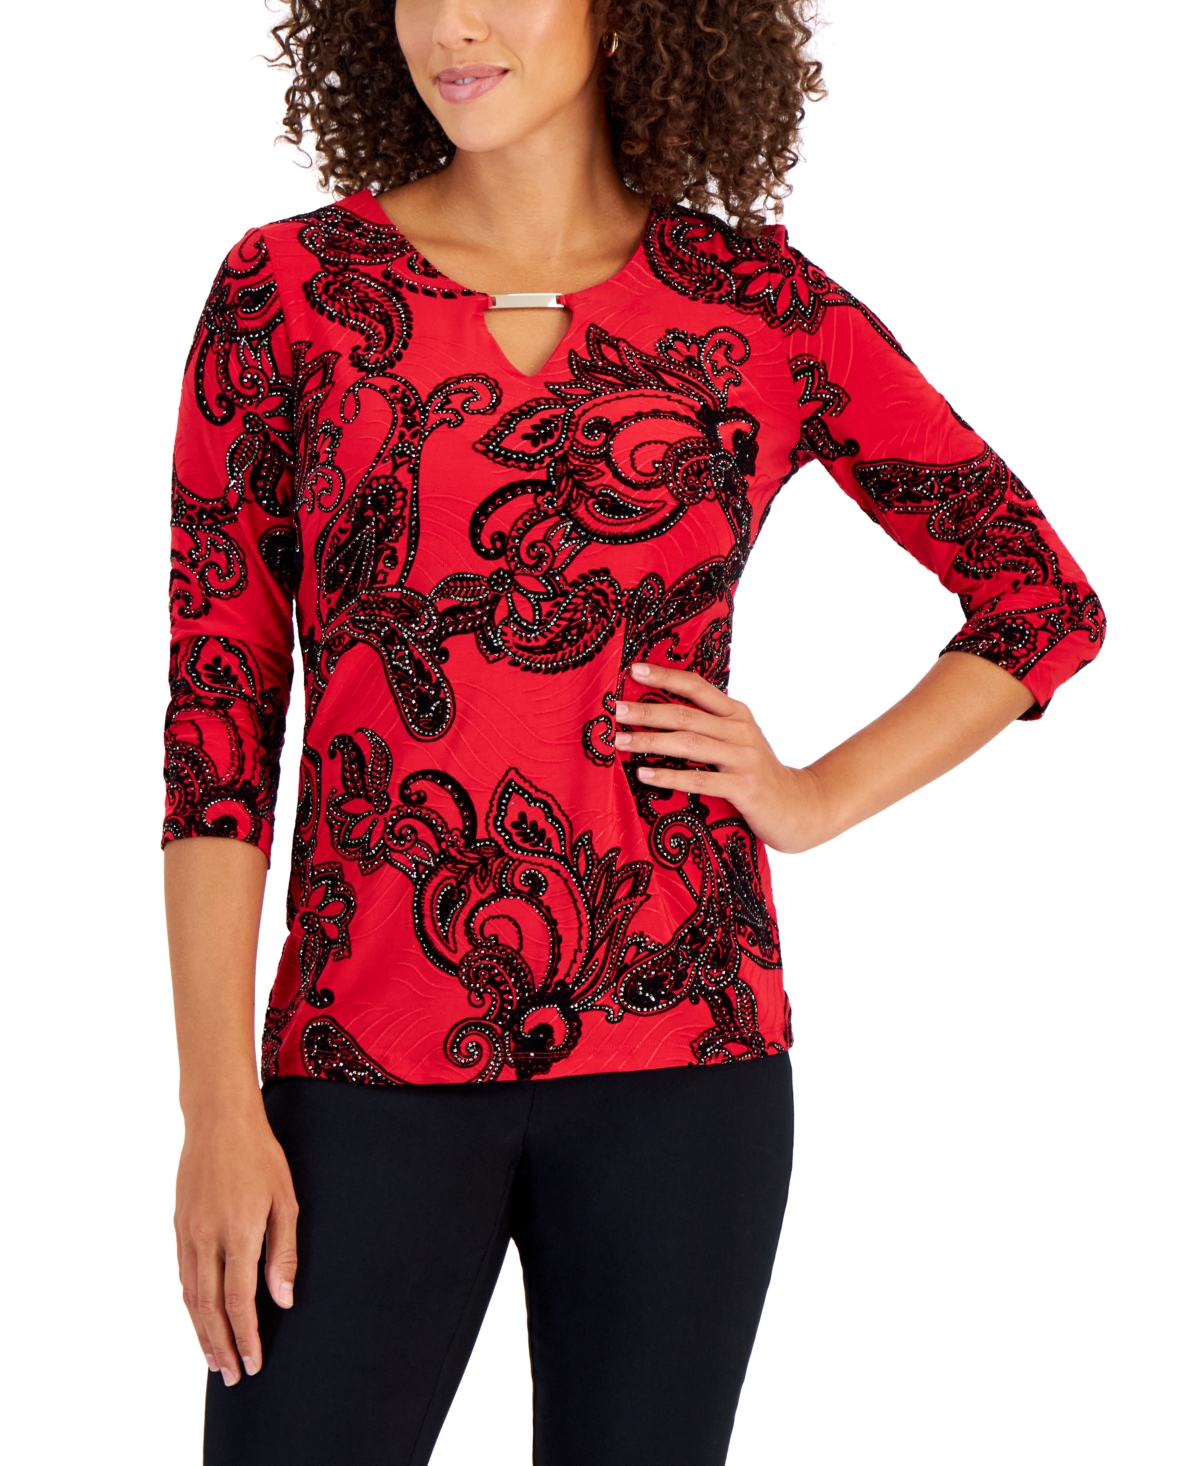 JM Collection Printed Hardware Top, Created for Macy's - Macy's